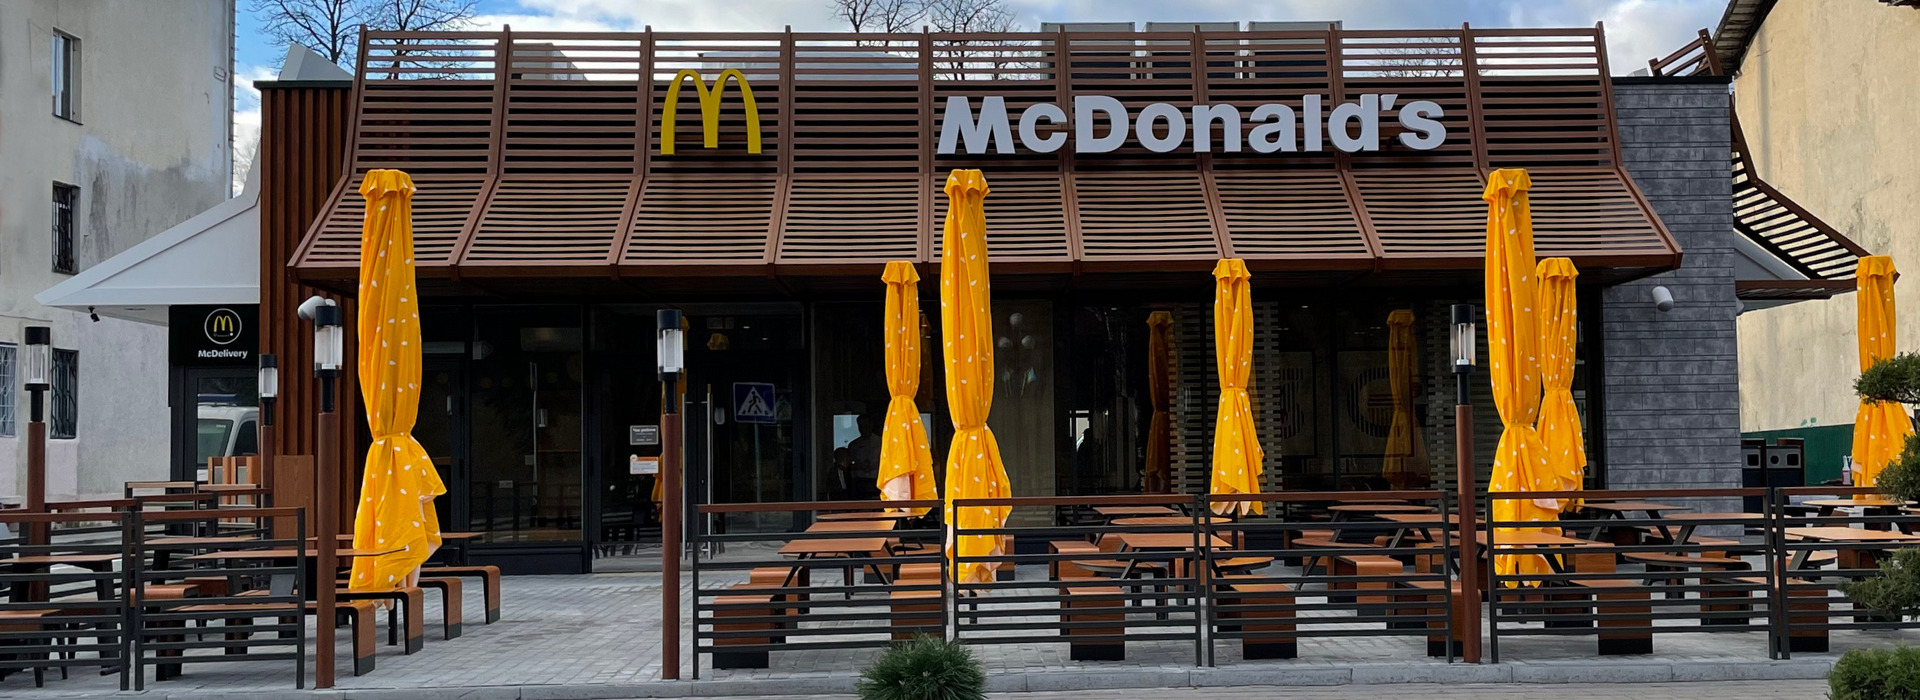 The New McDonald’s Is in Picturesque Yaremche on the Way to the Ski Resorts of the Carpathians